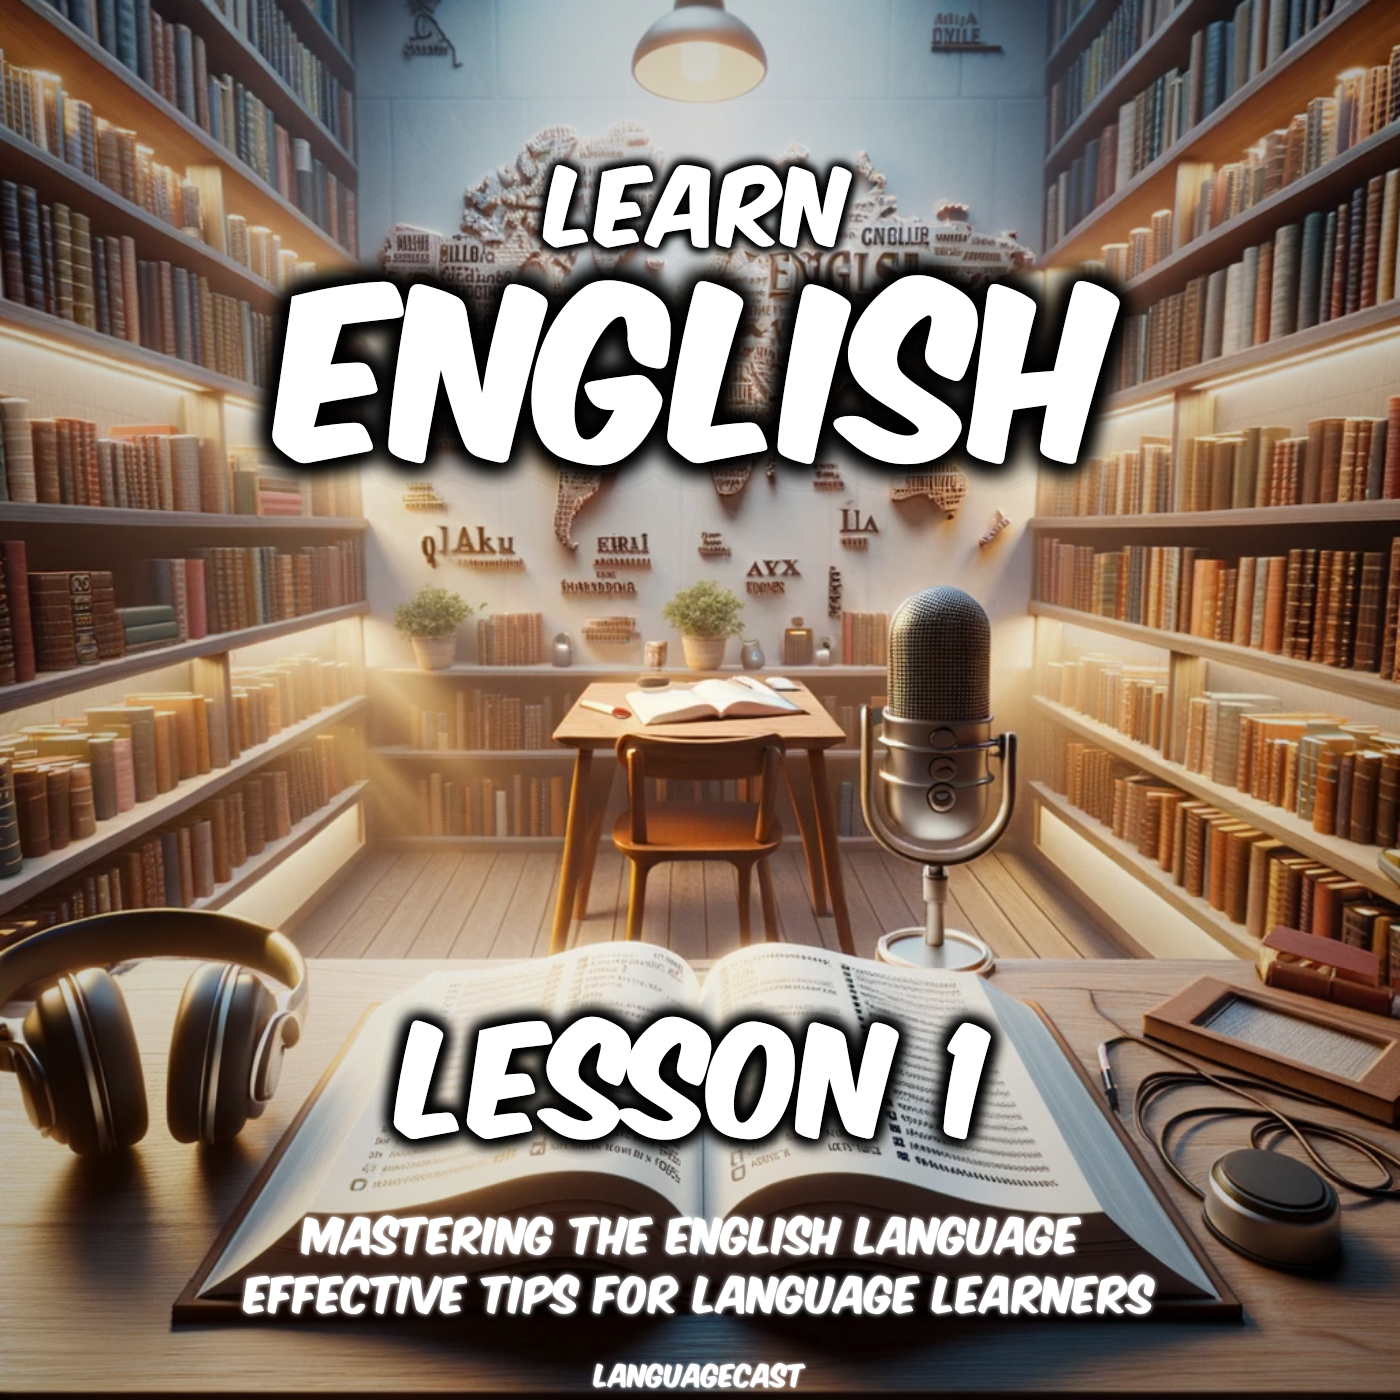 Learn English, Lesson 1: Mastering the English Language (Effective Tips for Language Learners)